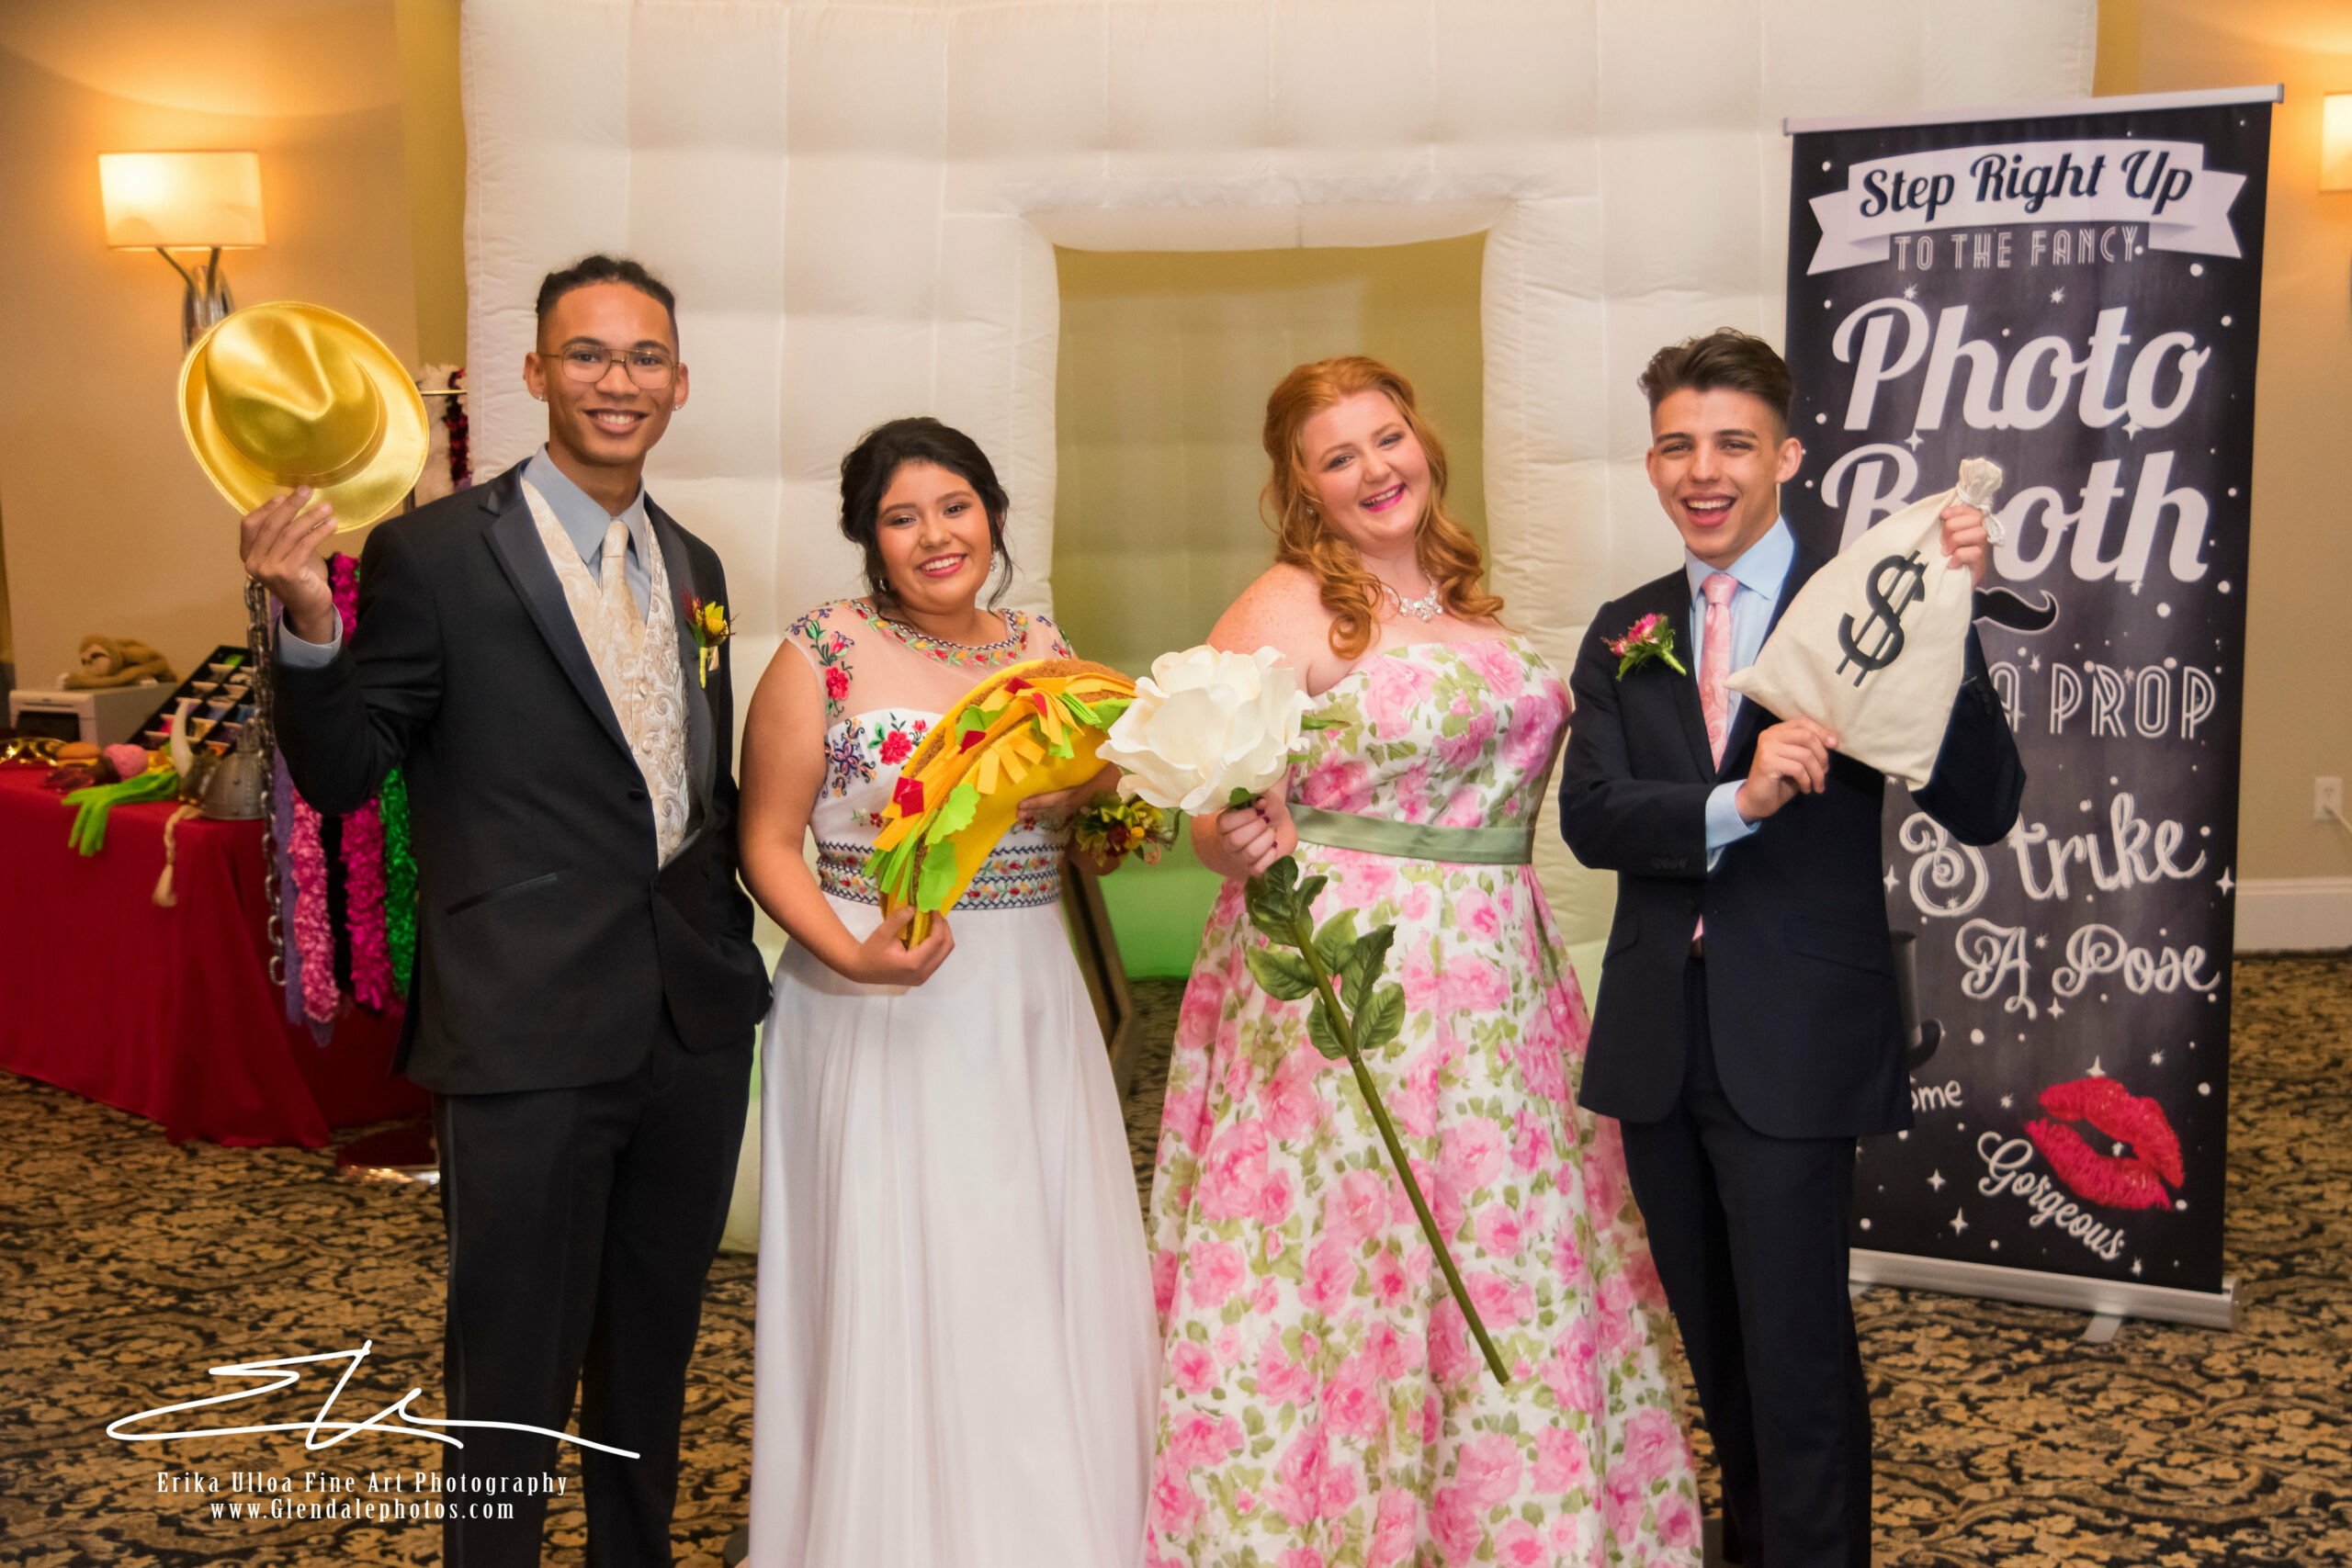 Wedding guests pose at a photo booth.